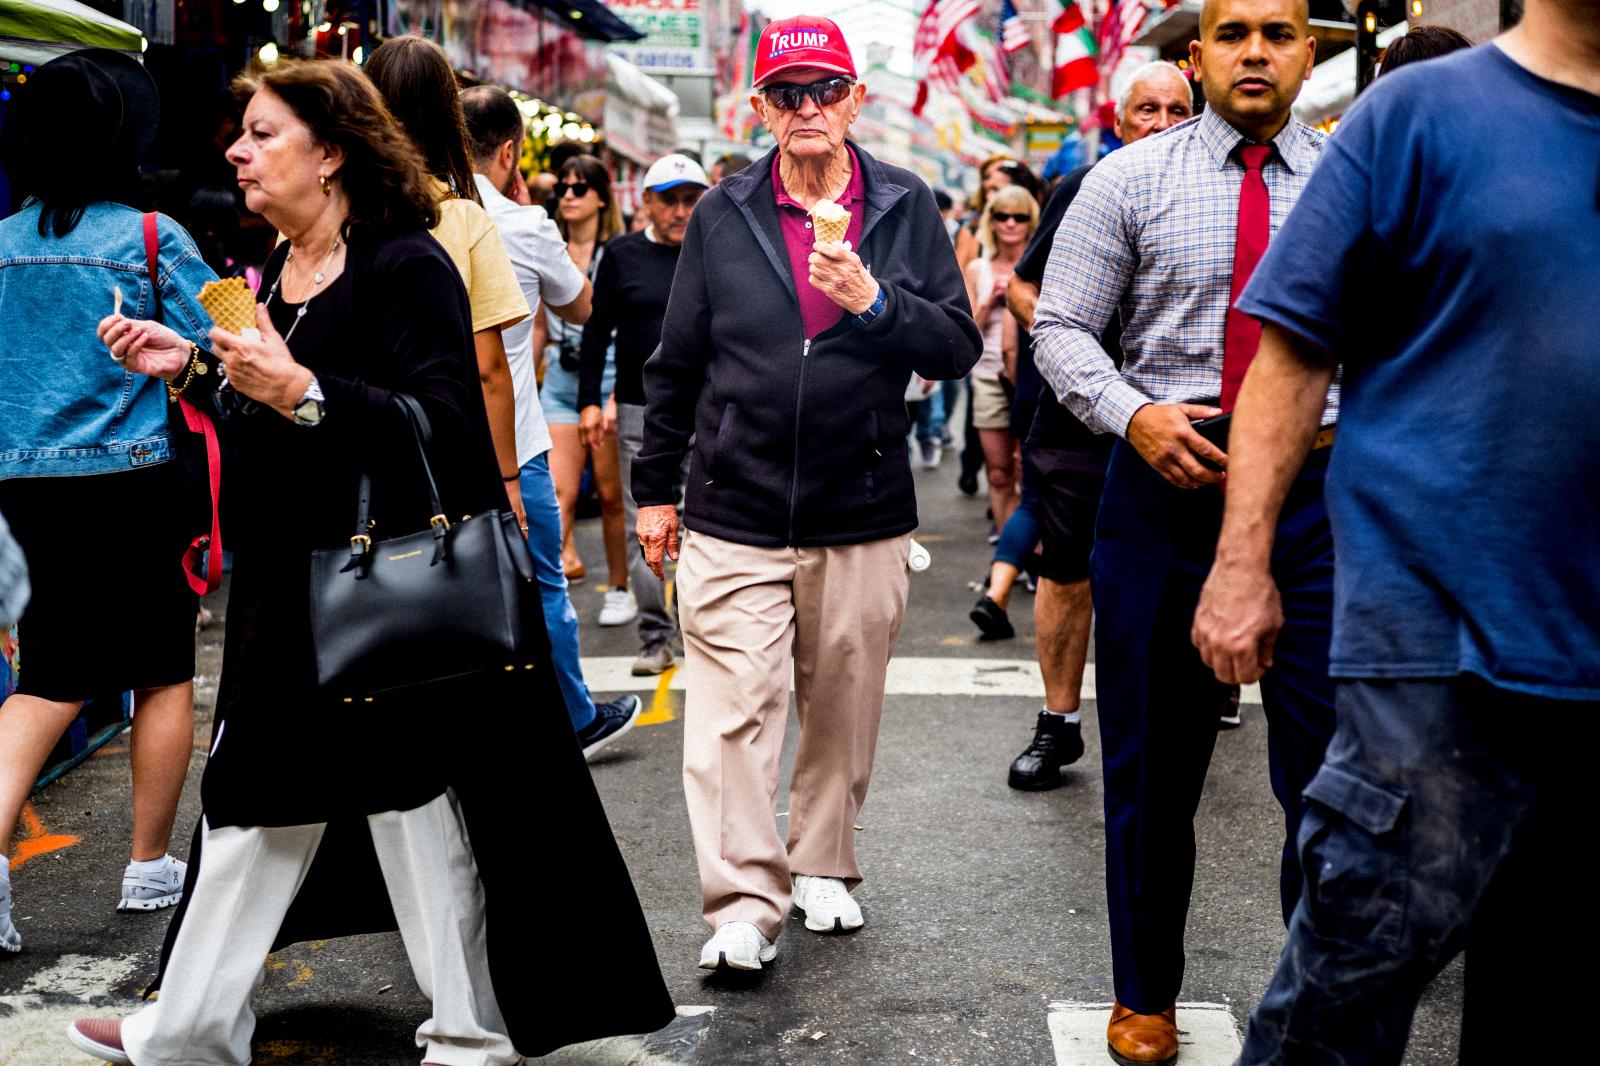 Image from Street Photography/Color Works -  Mulberry Street, Manhattan NYC  September 2019 